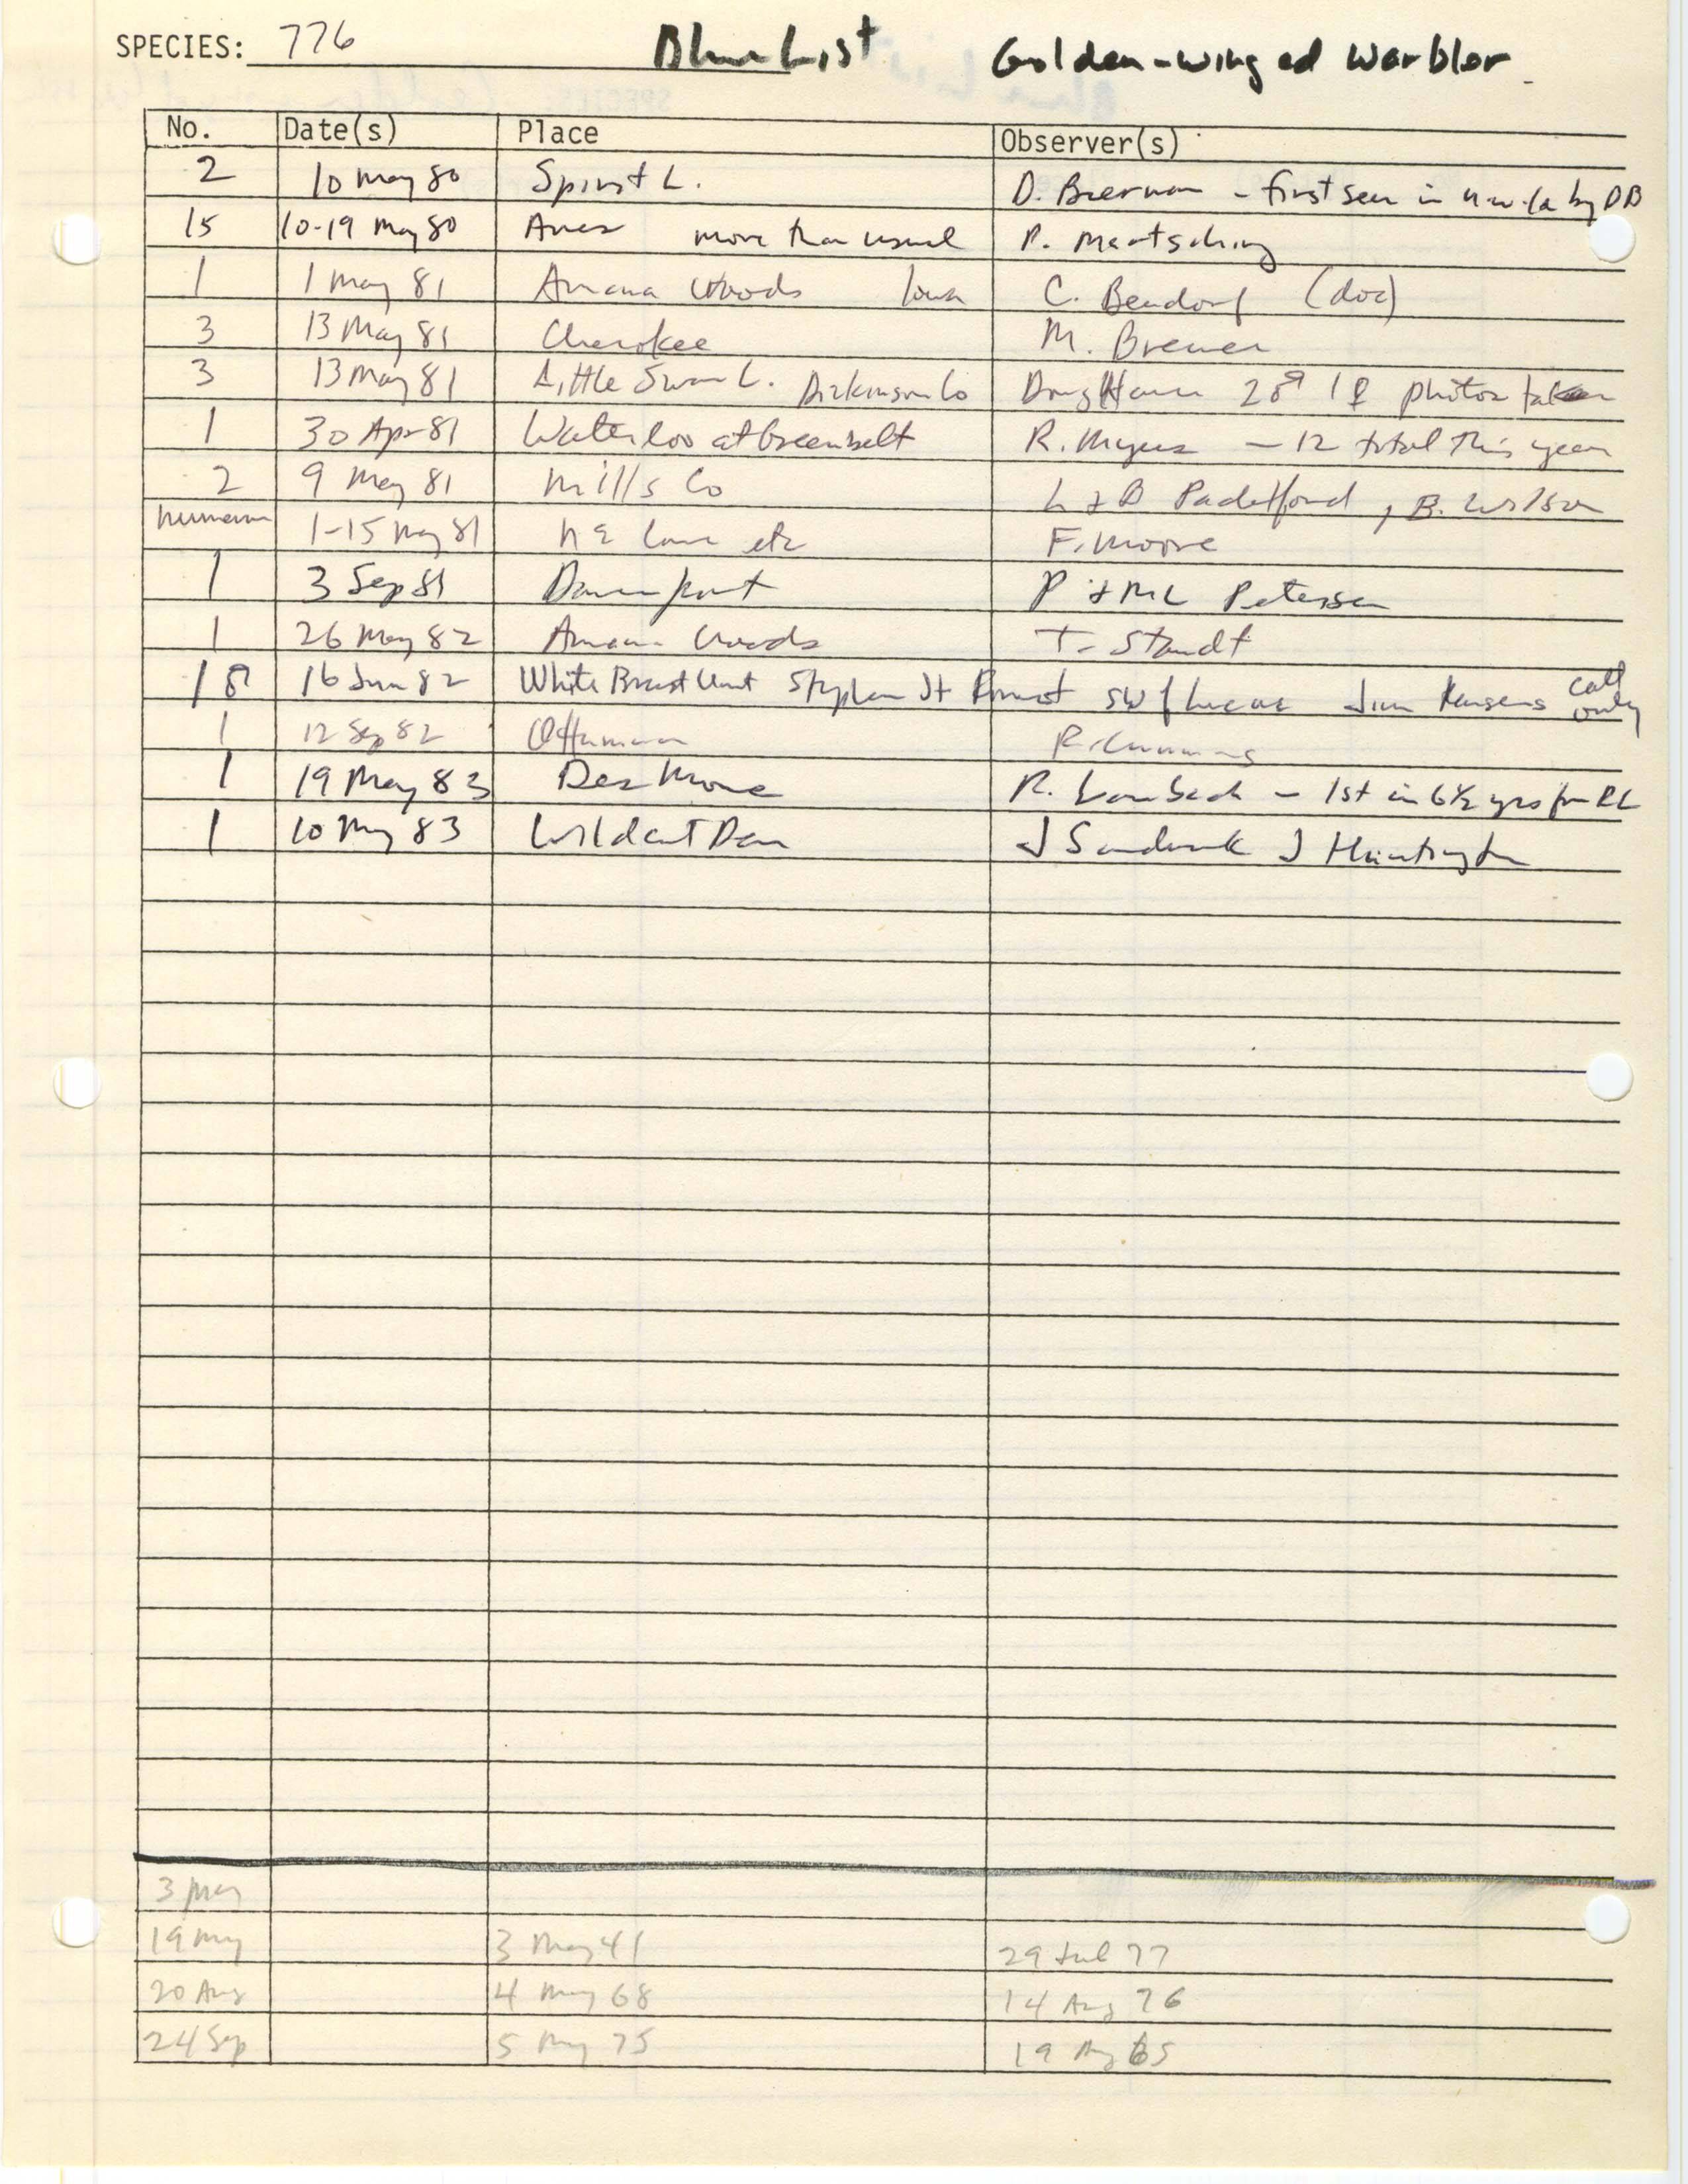 Iowa Ornithologists' Union, field report compiled data, Golden-winged Warbler, 1980-1983